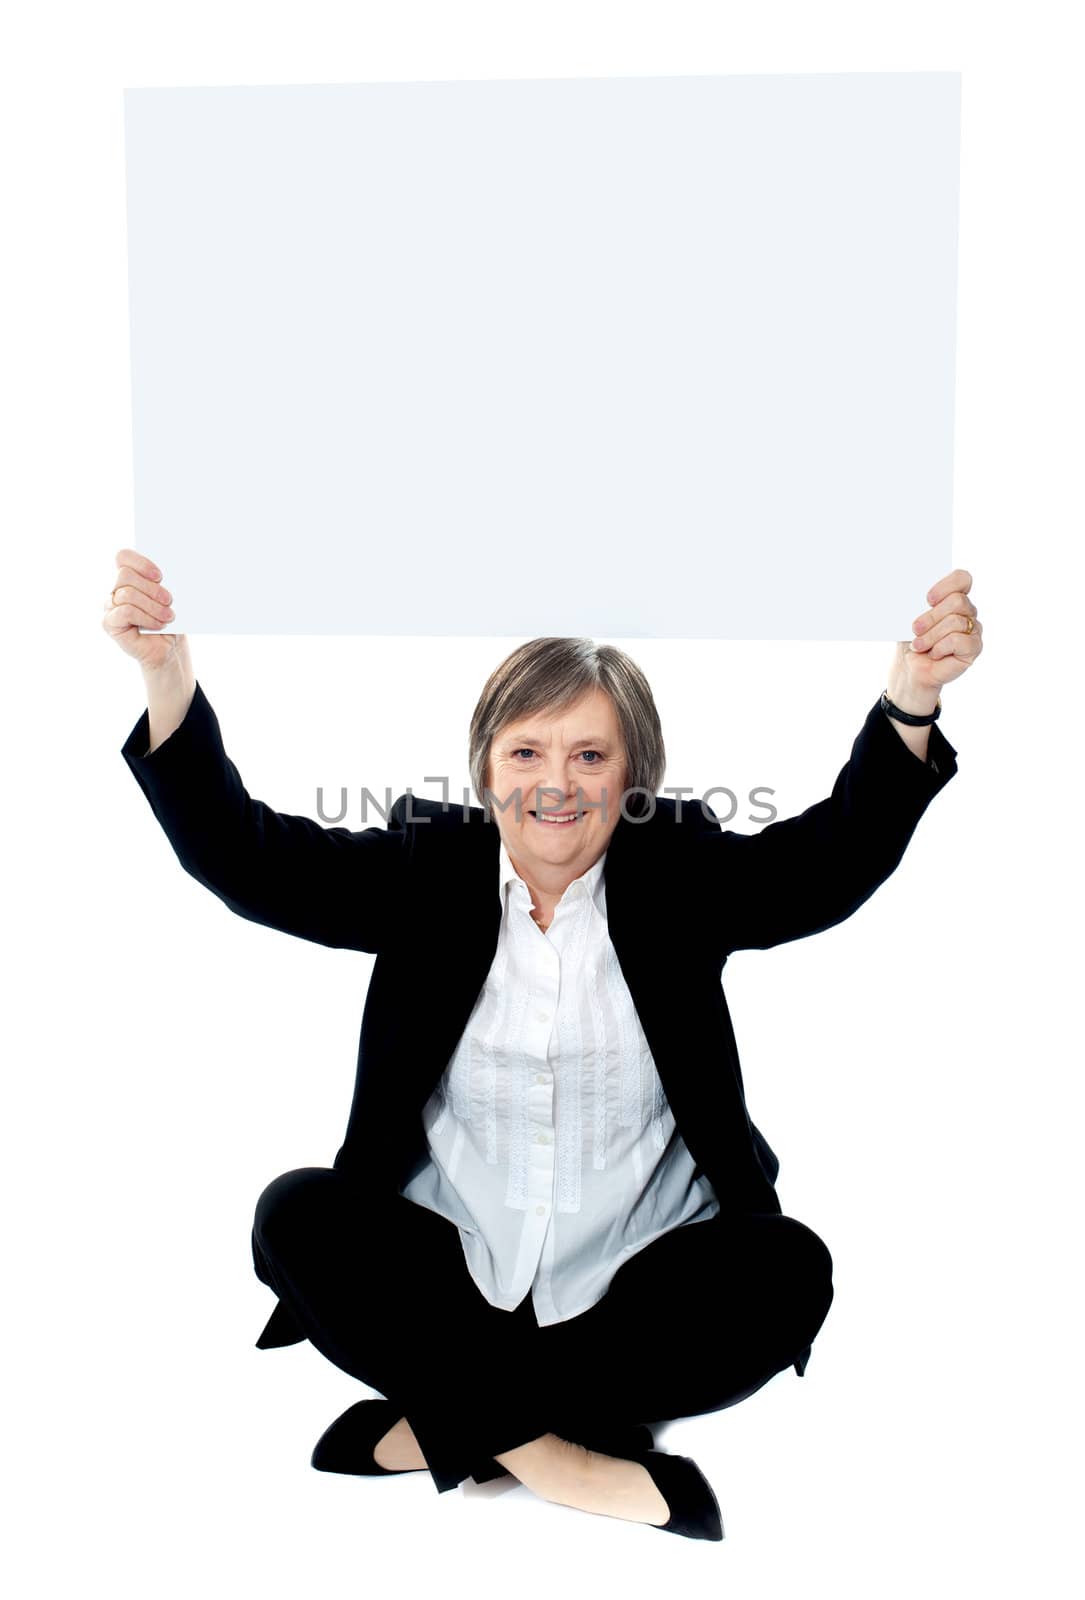 Seated businesswoman holding blank whiteboard over her head